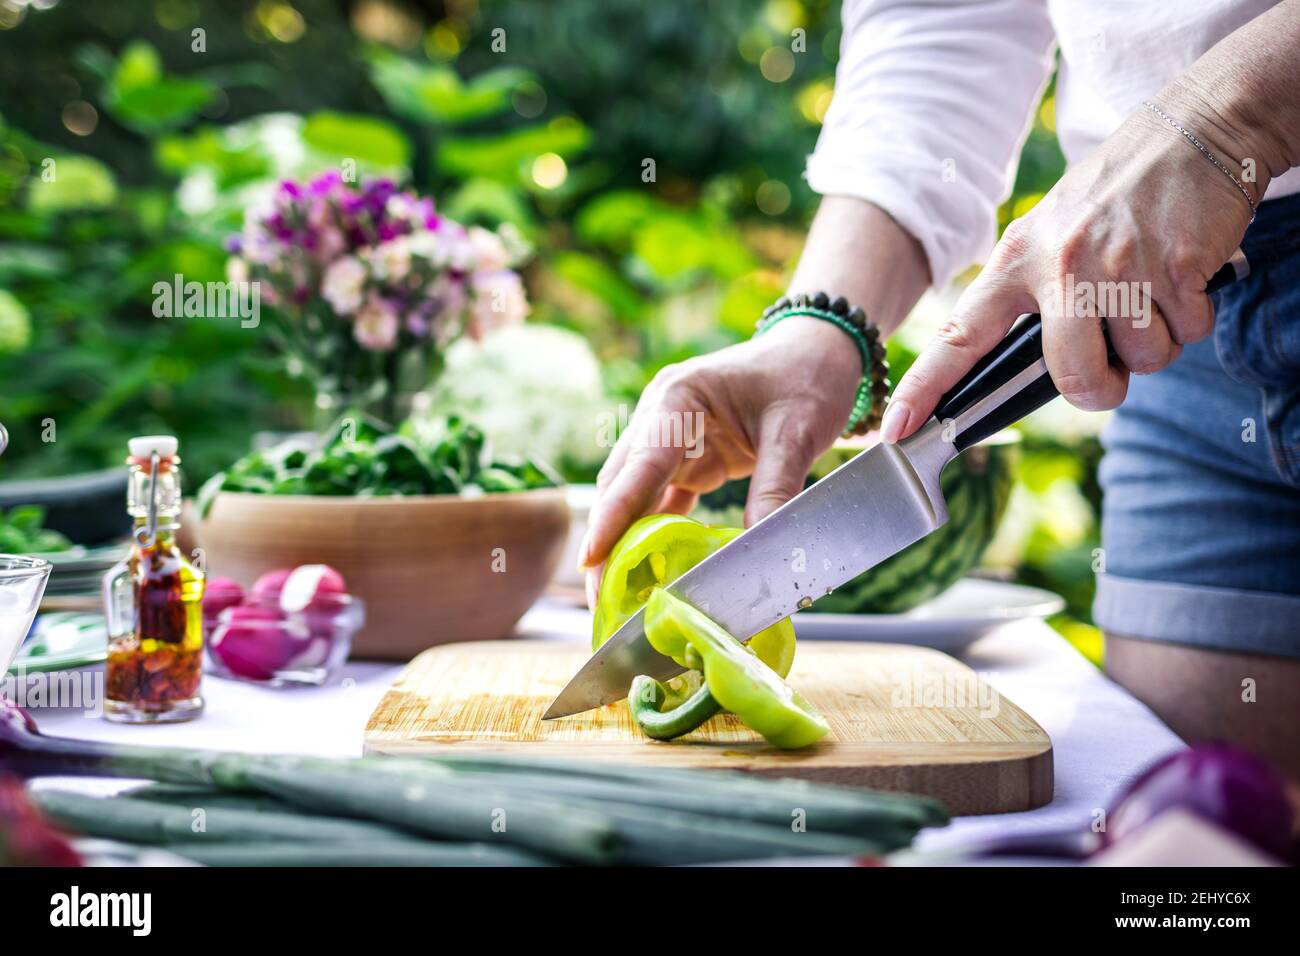 https://c8.alamy.com/comp/2EHYC6X/cutting-green-peppers-by-kitchen-knife-woman-cooking-vegetable-salad-on-table-outdoors-preparation-food-for-garden-party-2EHYC6X.jpg